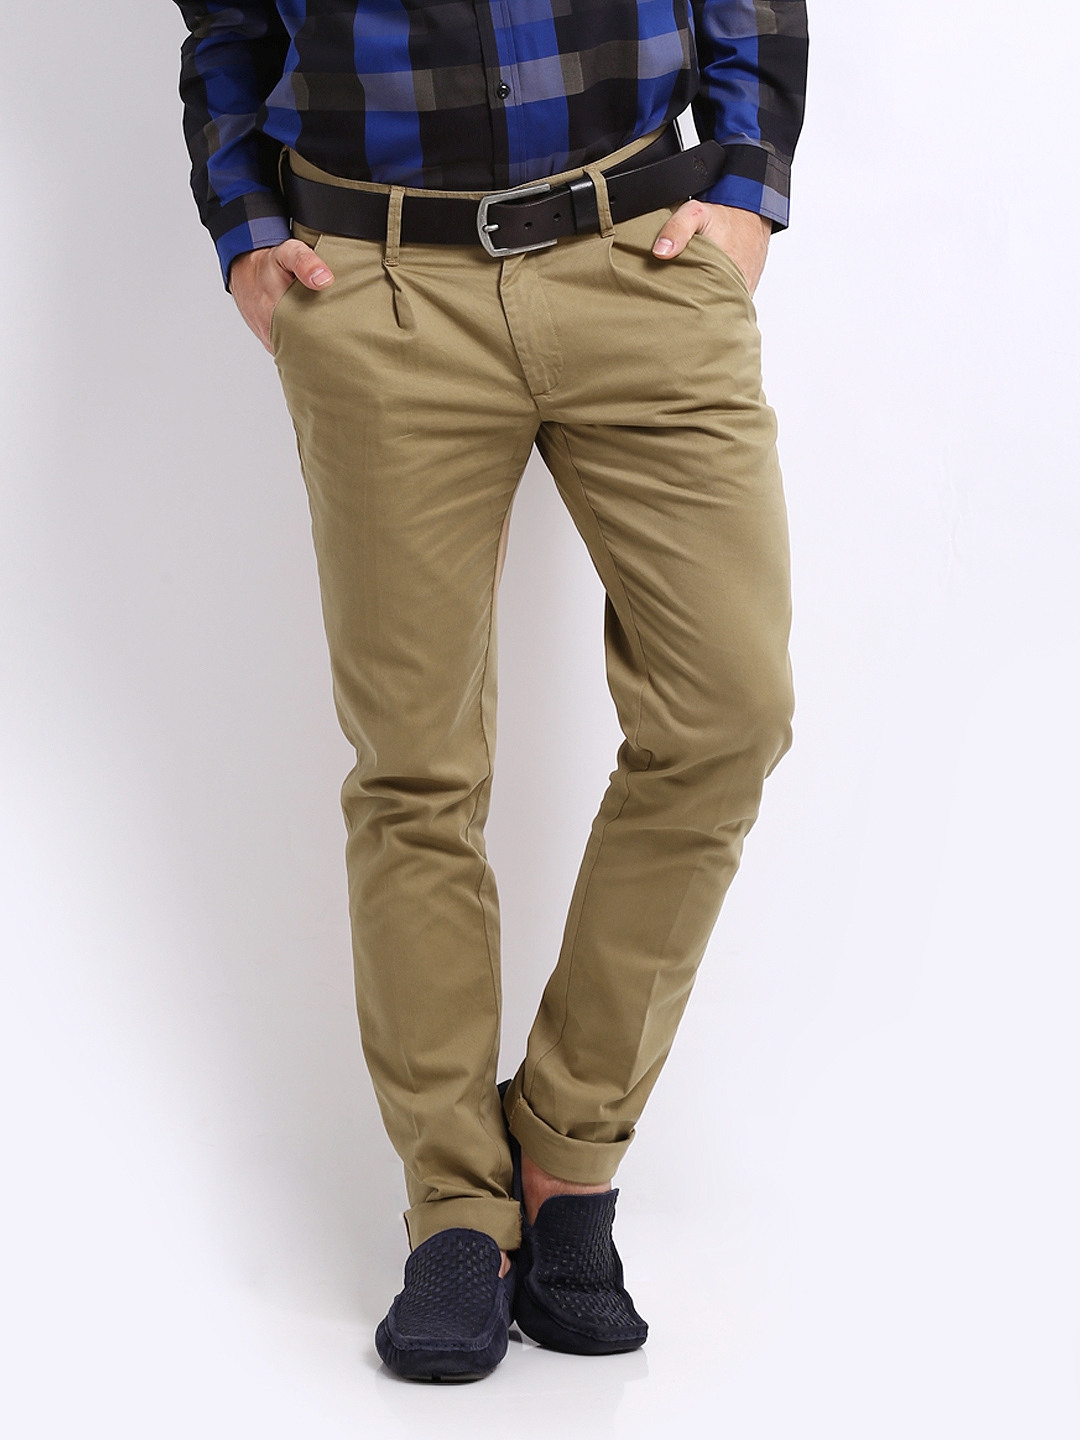 Buy Arrow Mens Tailored Polyester Blend Trousers ARADOTR2331Light  Brown30 at Amazonin